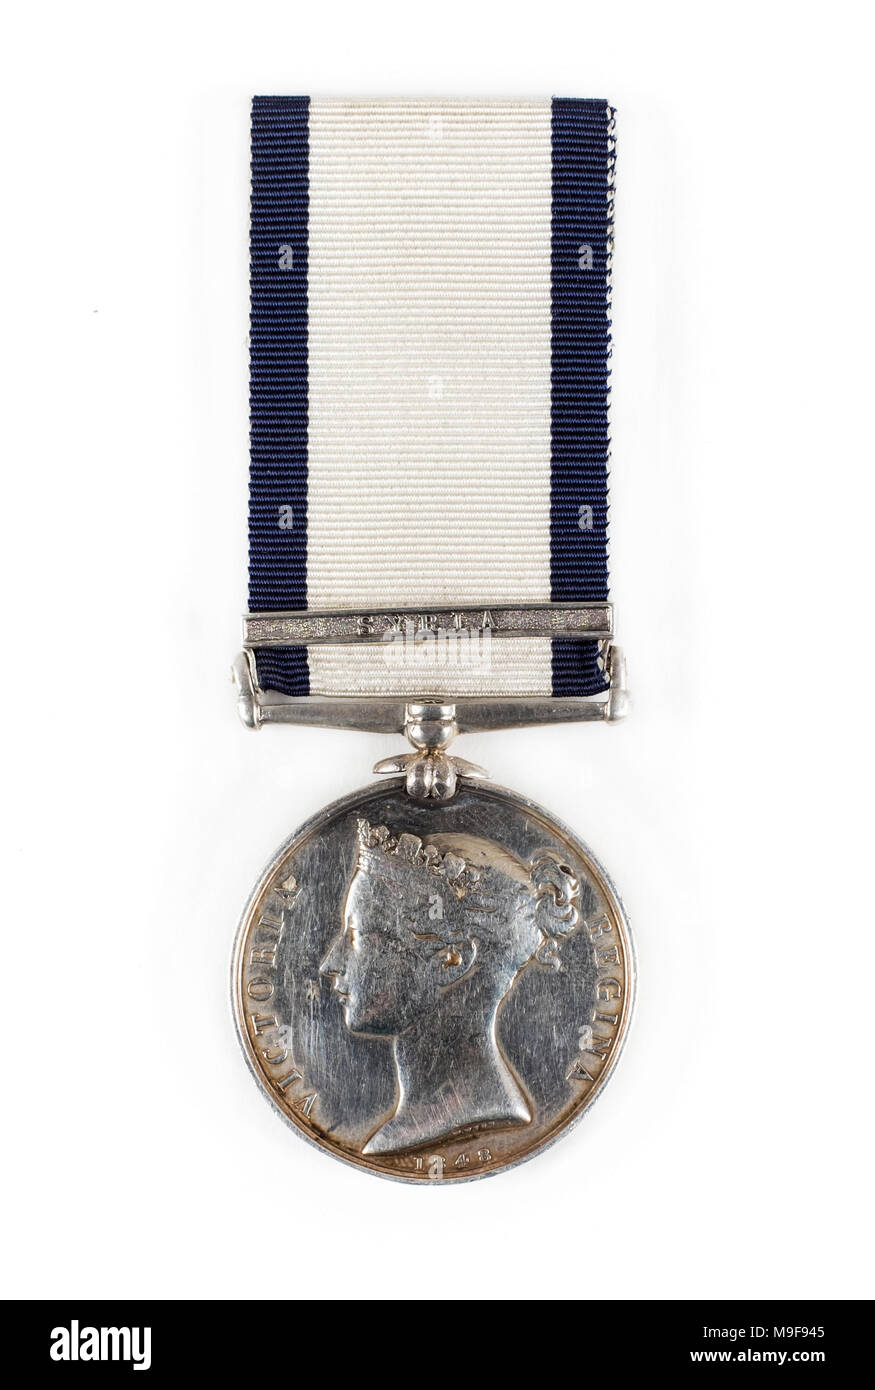 British Naval General Service Medal (NGSM) with Syria clasp to Jeremiah Sutton who served on HMS Pique as an Orderly during the Second Syrian War. Stock Photo